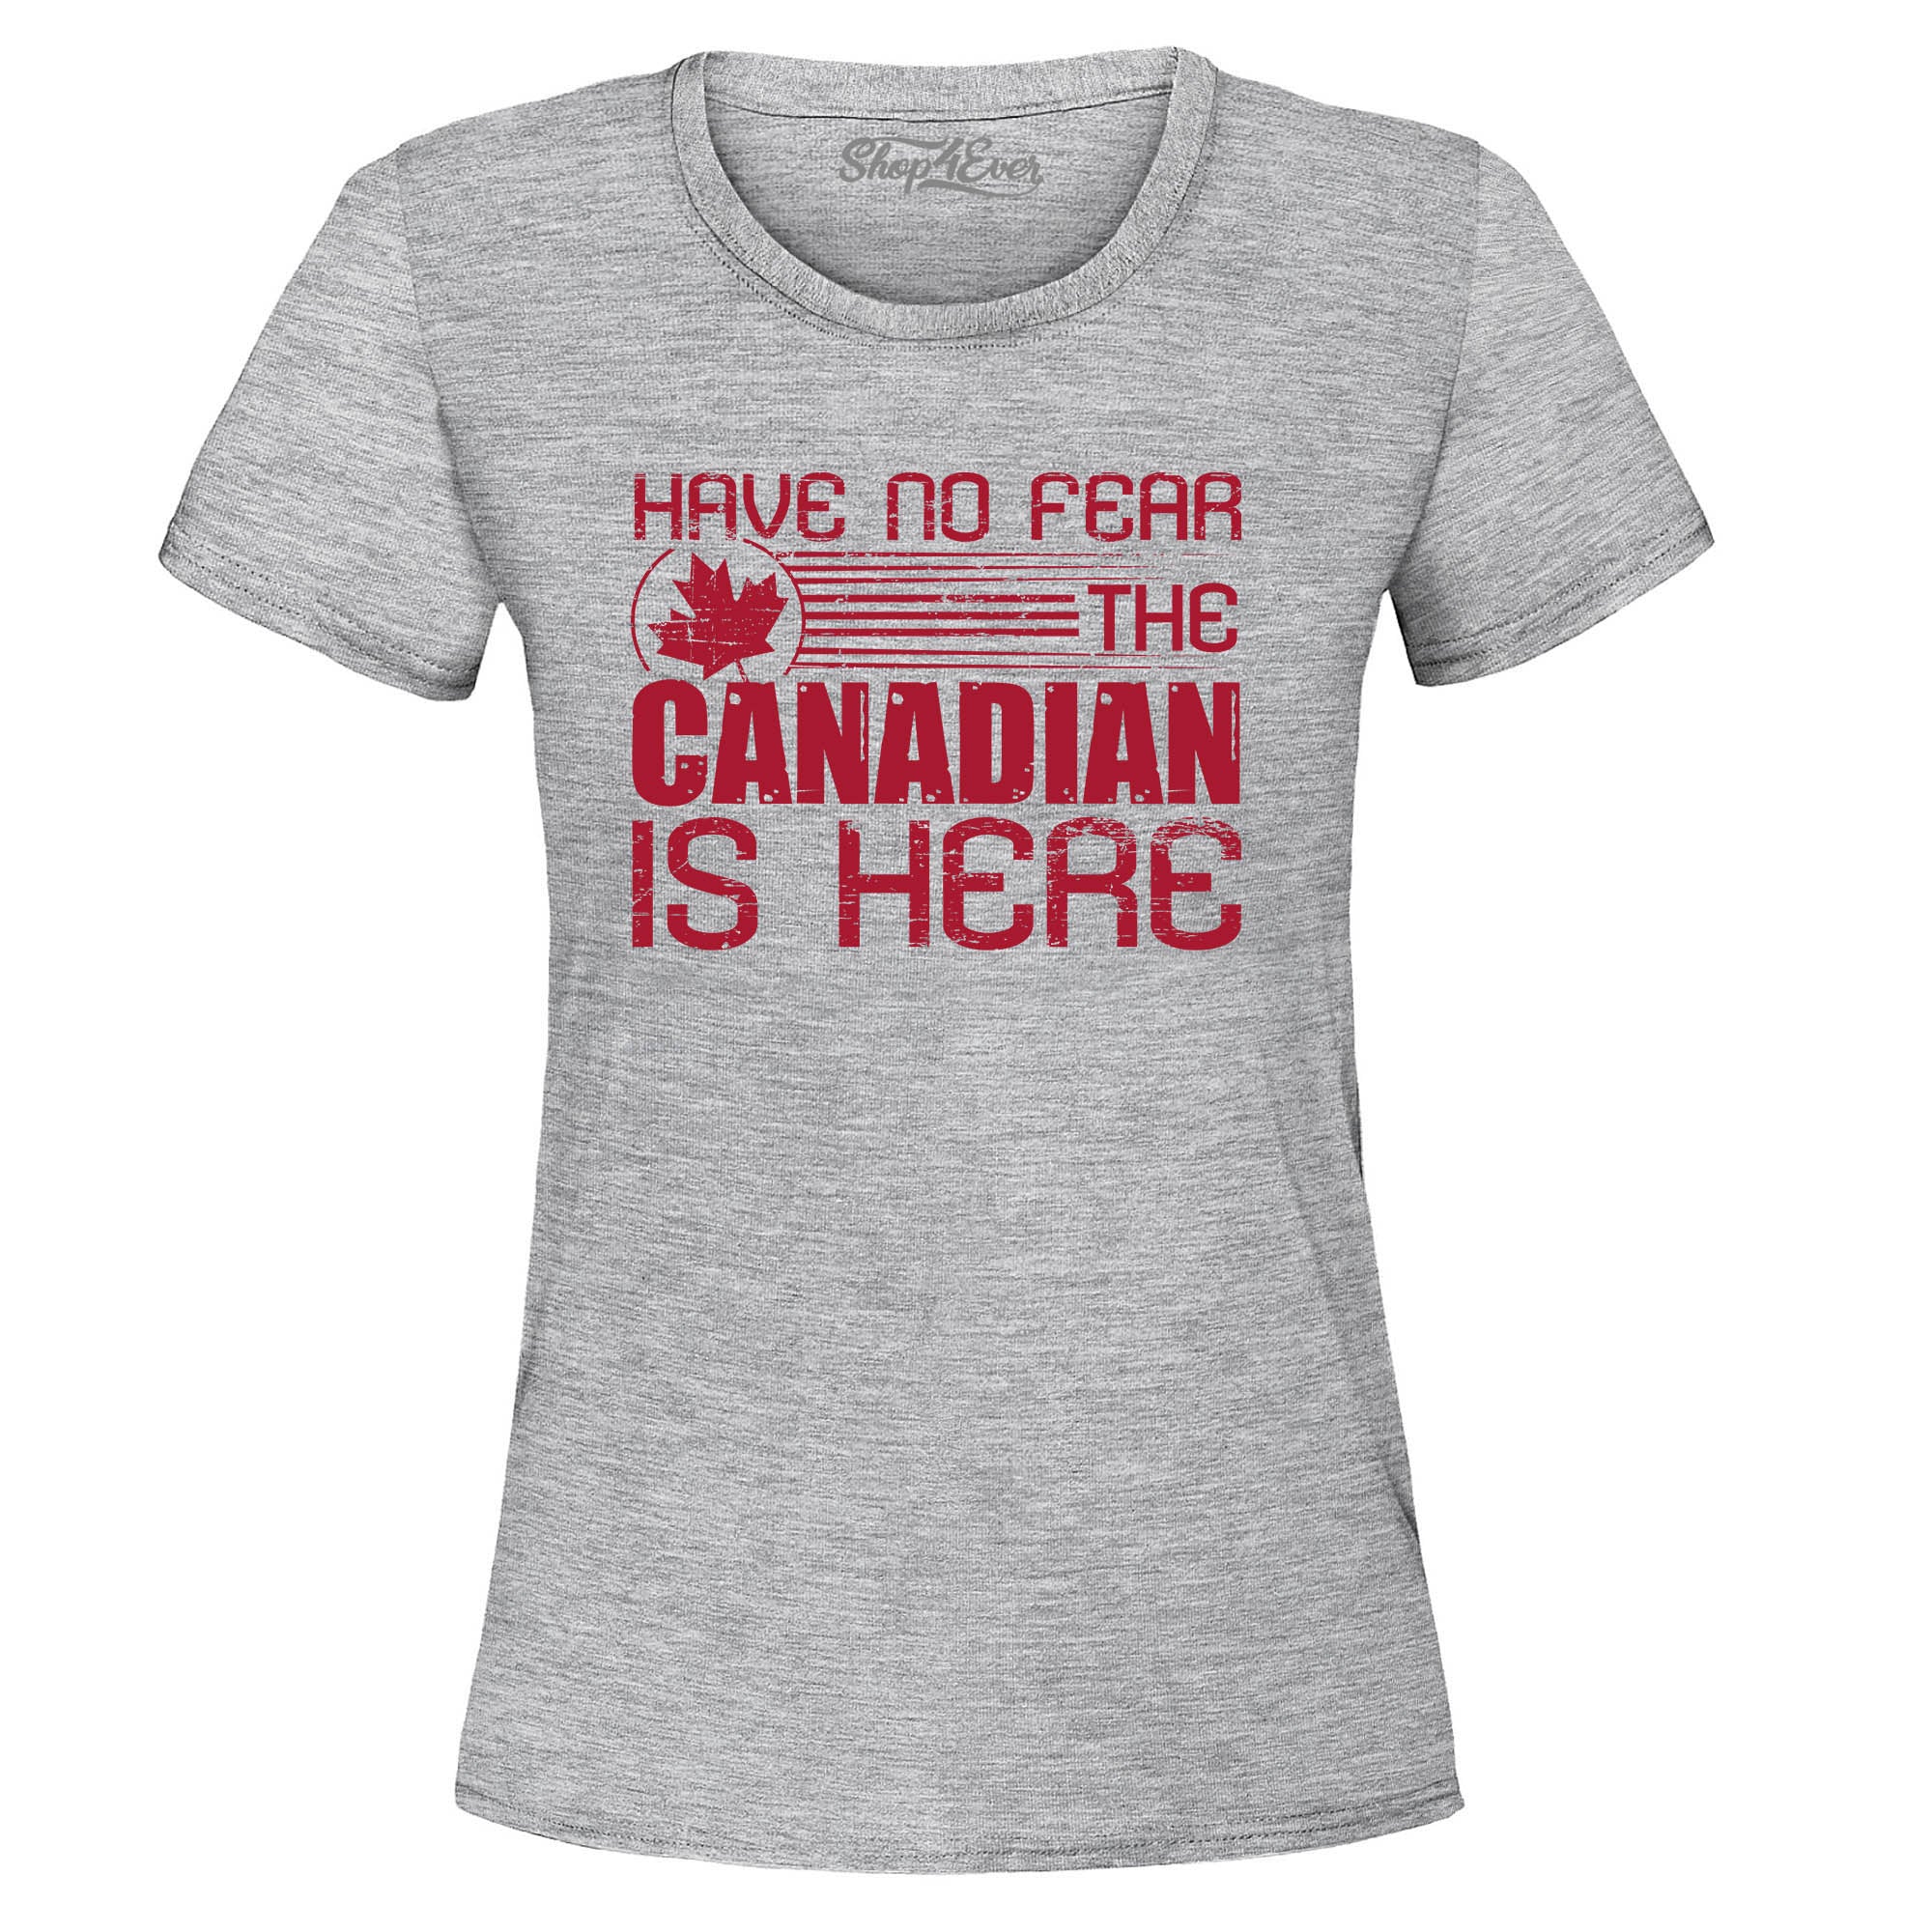 Have No Fear The Canadian is Here Canada Pride Women's T-Shirt